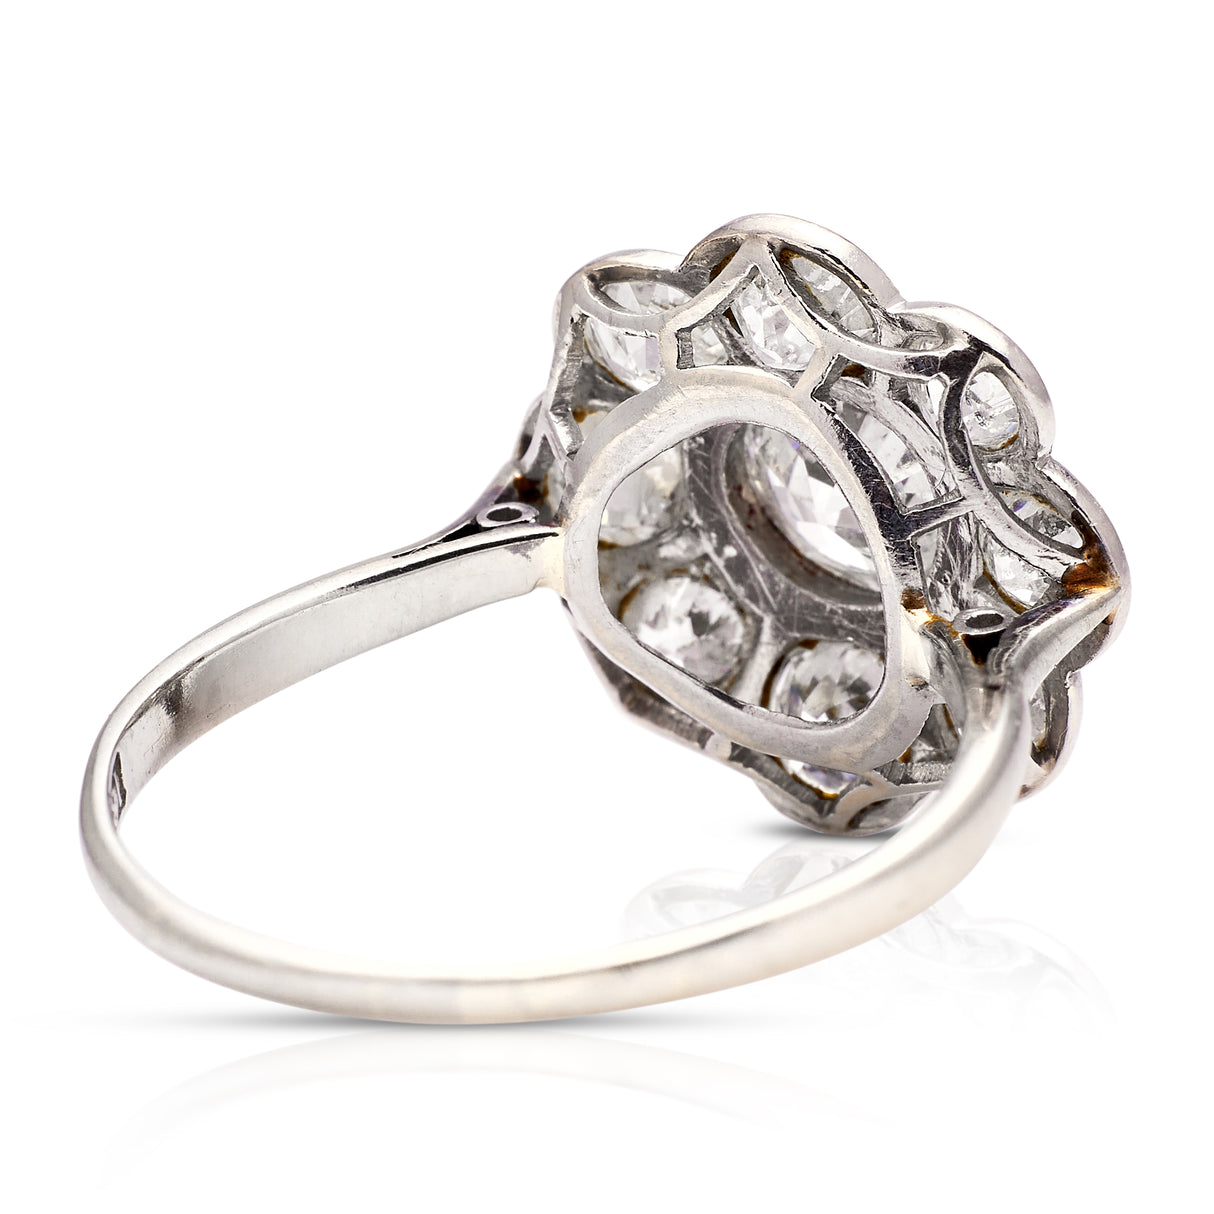 Diamond daisy cluster ring, rear view. 